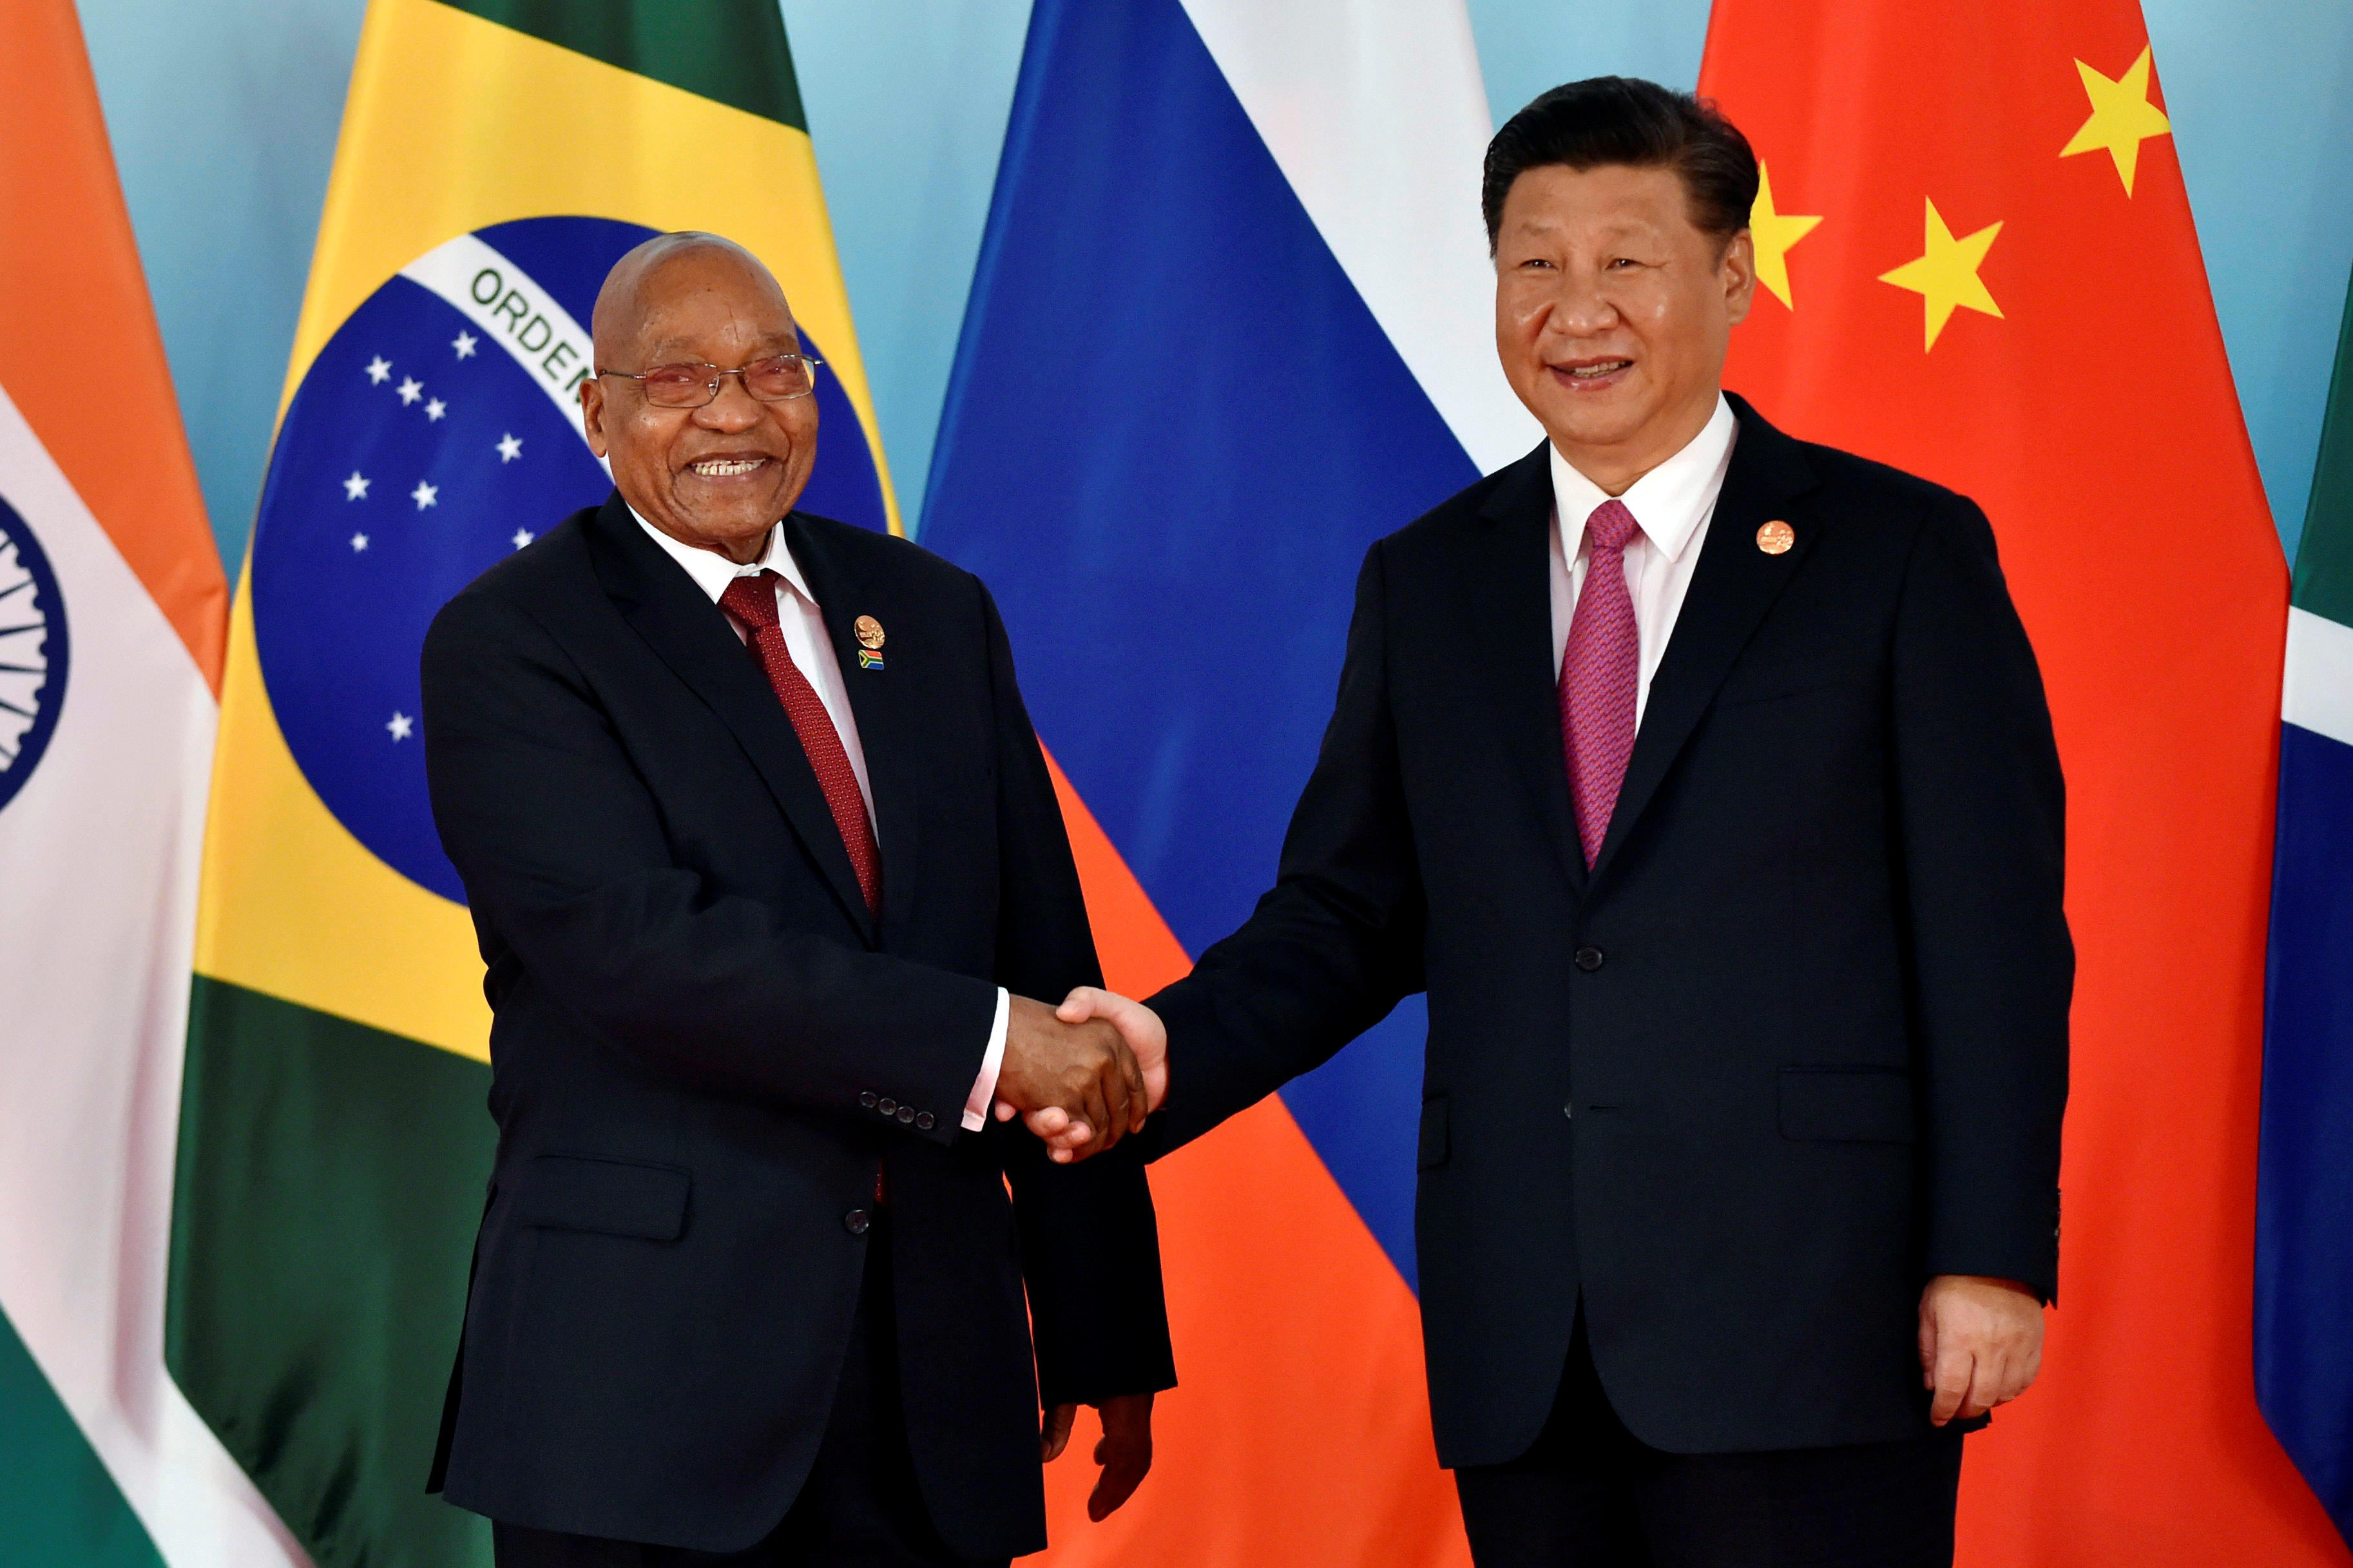 Chinese President Xi Jinping (R) and South Africa's President Jacob Zuma shake hands before the group photo during the BRICS Summit at the Xiamen International Conference and Exhibition Center in Xiamen, southeastern China's Fujian Province, China September 4, 2017. REUTERS/Kenzaburo Fukuhara/Pool - RC12CBC6B5B0